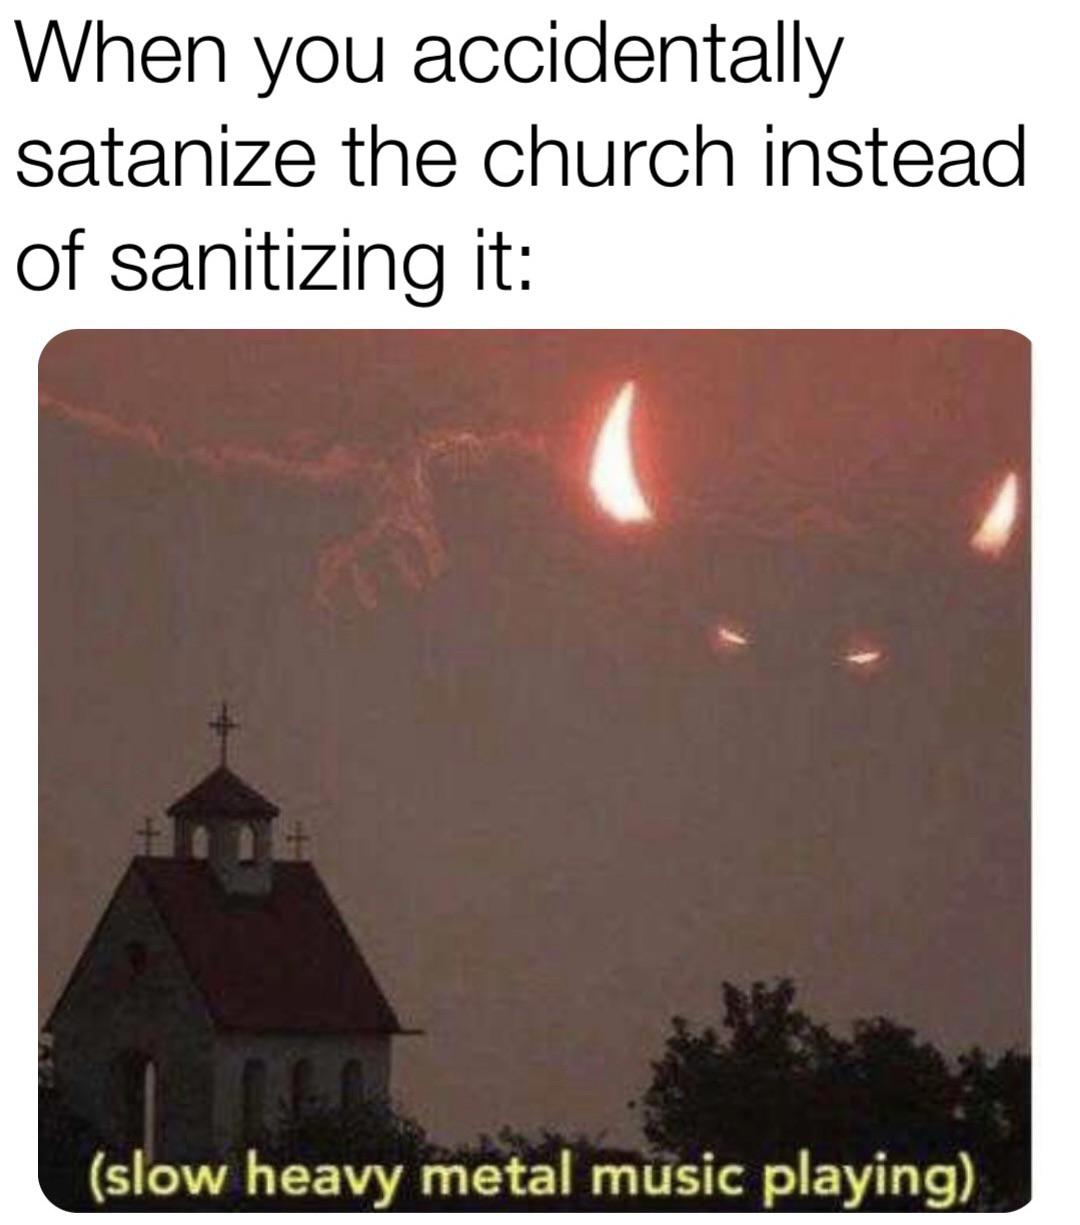 heat - When you accidentally satanize the church instead of sanitizing it slow heavy metal music playing